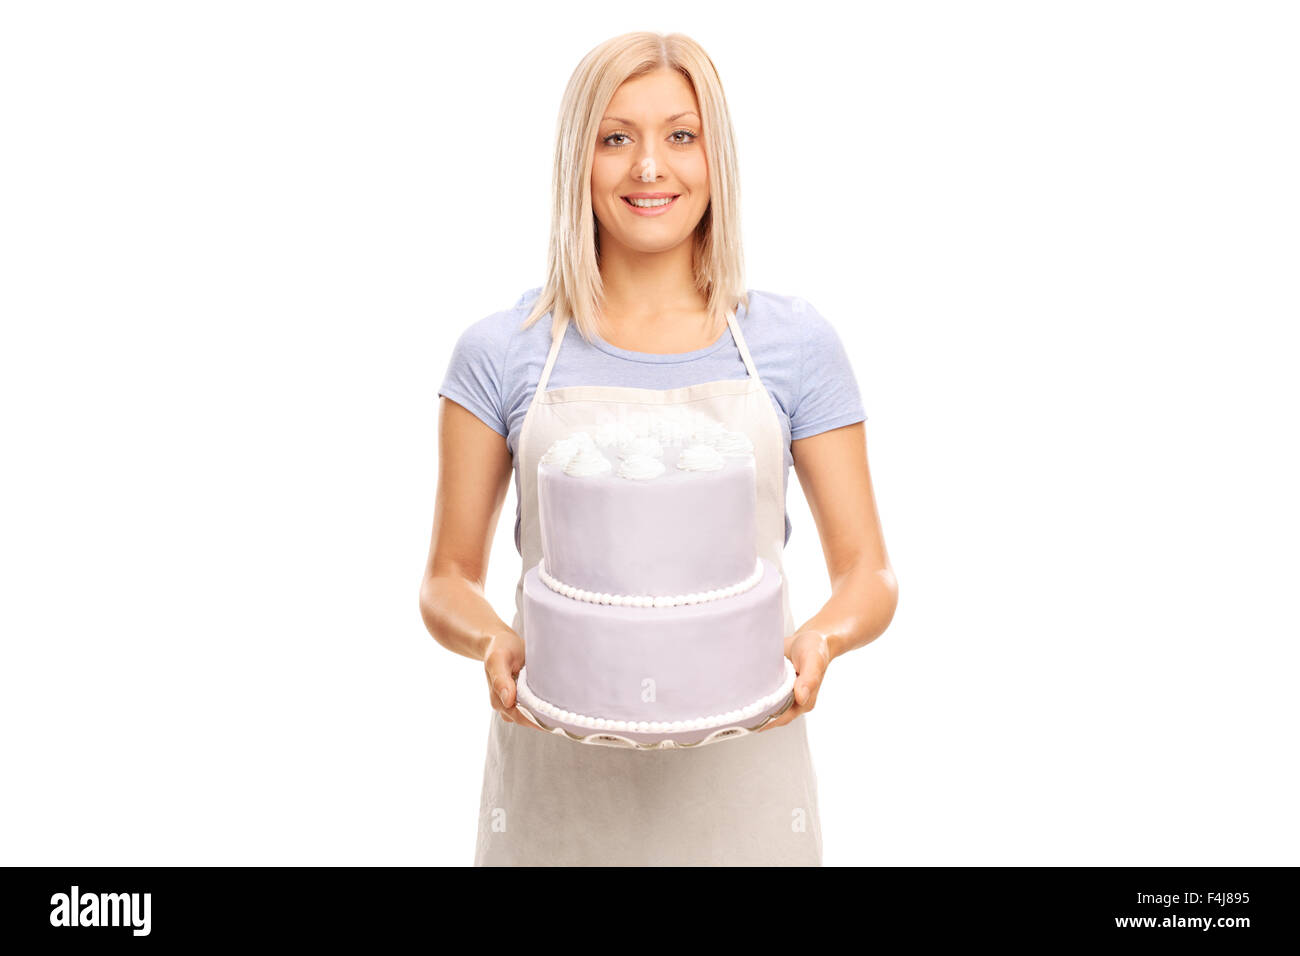 Studio shot of a blond female pastry chef carrying a large cake and looking at the camera isolated on white background Stock Photo